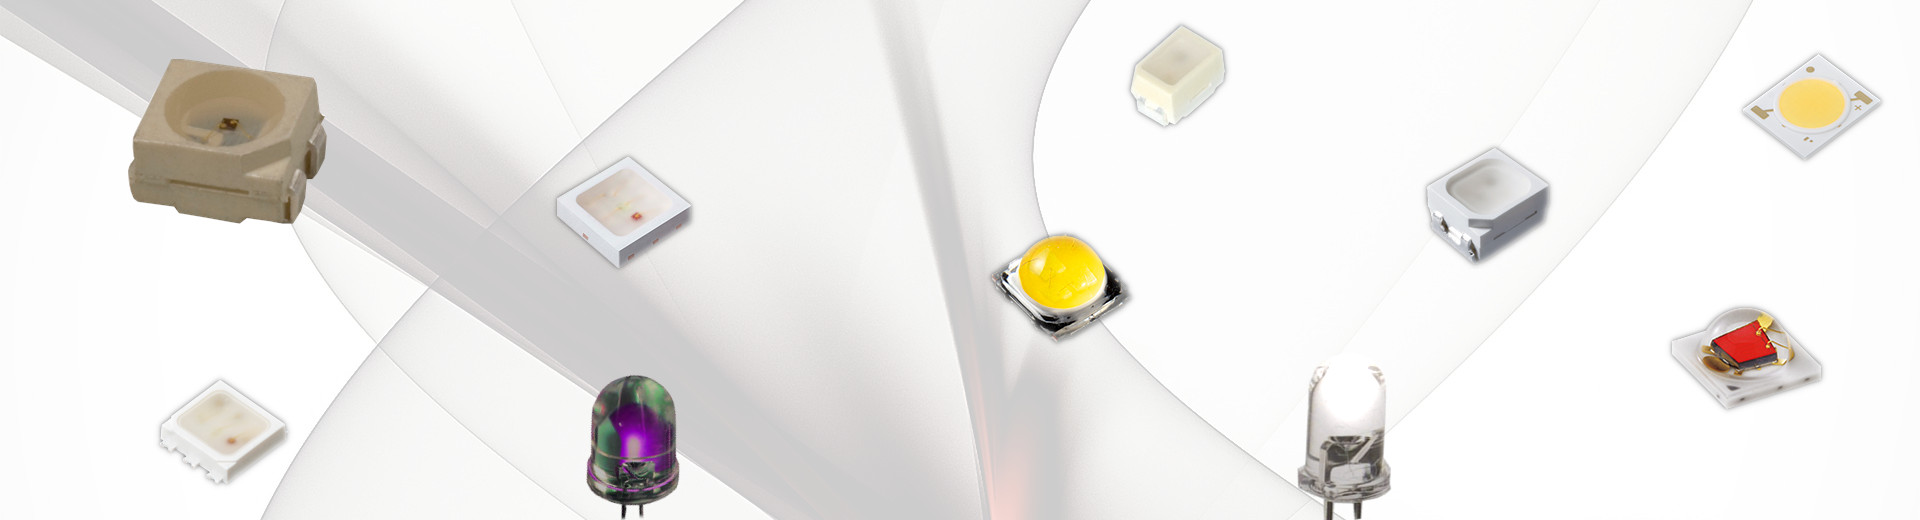 Led industrial applications